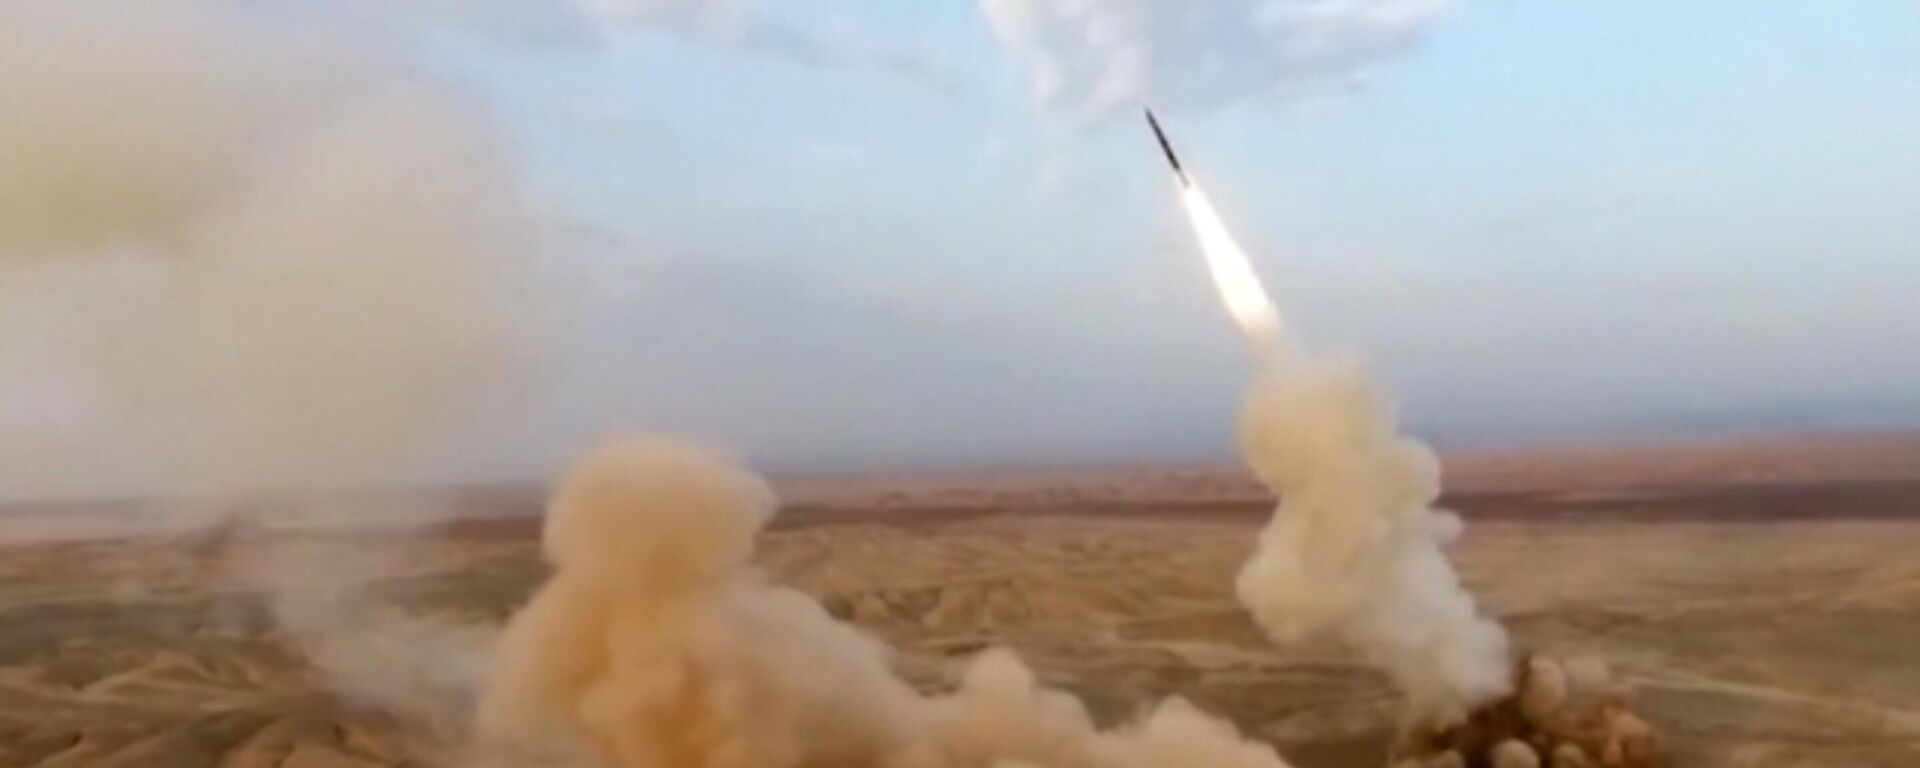 This frame grab from video shows the launching of underground ballistic missiles by the Iranian Revolutionary Guard during a military exercise, July 29, 2020. Iran's paramilitary guard launched underground ballistic missiles as part of an exercise involving a mock-up aircraft carrier in the Strait of Hormuz, state television reported Wednesday - Sputnik International, 1920, 17.02.2024